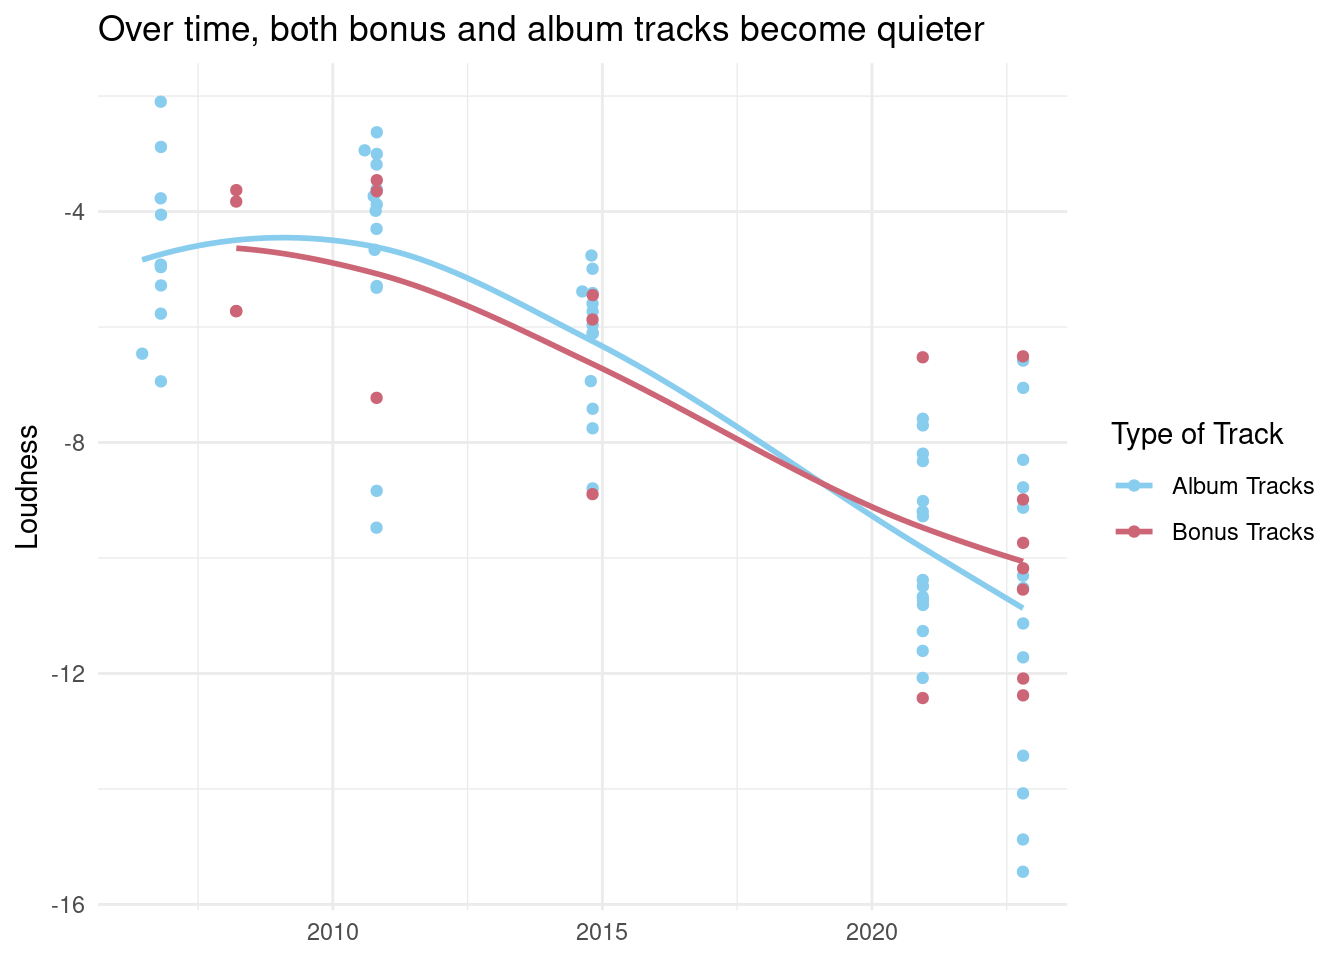 The plot is titled Over time, both bonus and album tracks become quieter. It is a scatter plot which plots time on the x-axis and the corresponding loudness metric on the y-axis. The points in the scatterplot are colored to show the difference between album and bonus tracks. released songs. This graph shows that as time progresses, Taylor Swift songs become quieter, whether or not they are a bonus track.